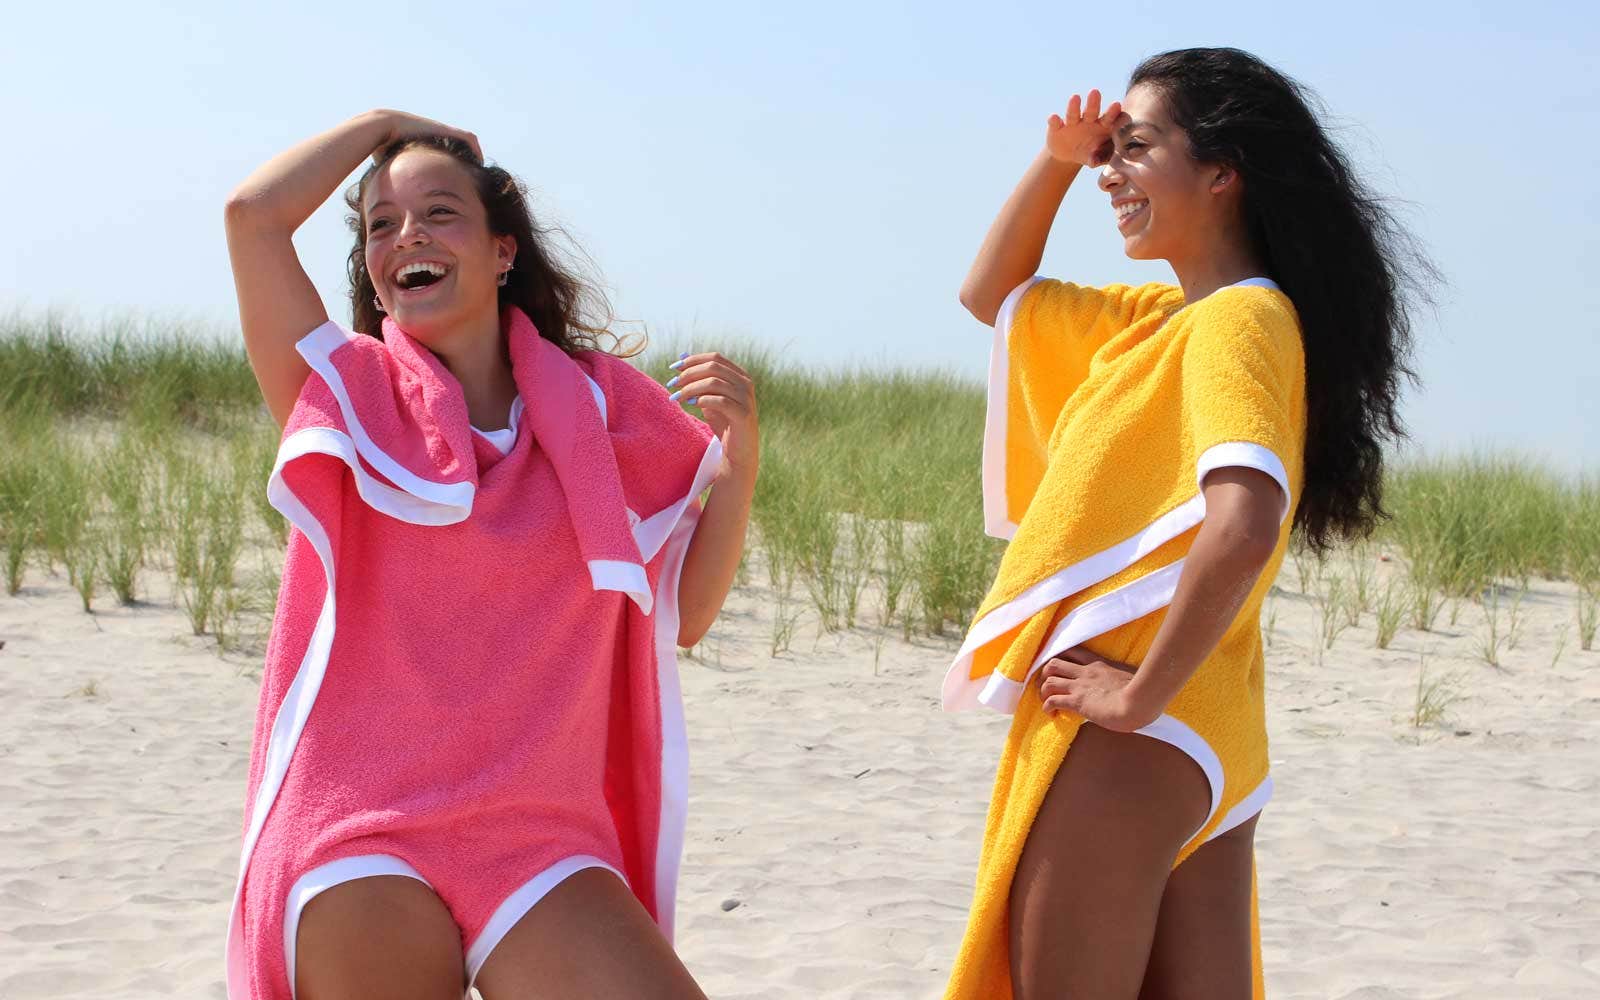 The 'Towelkini' might be summer's most unusual beachwear trend